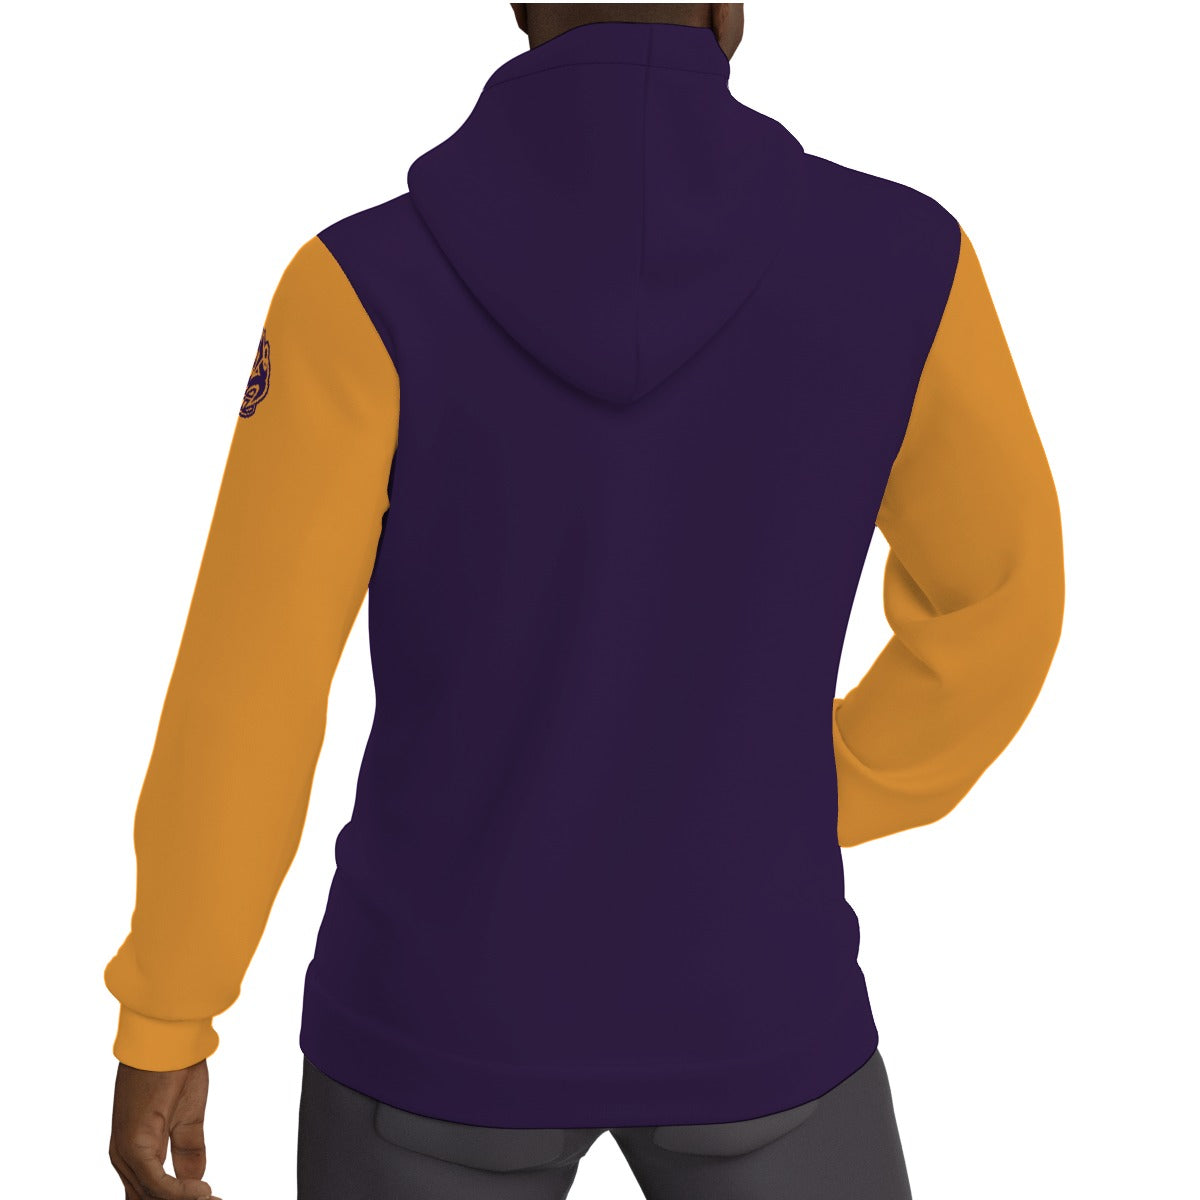 
                  
                    A.A. The 6th Man Purple Yellow Men's Thicken Pullover Hoodie
                  
                